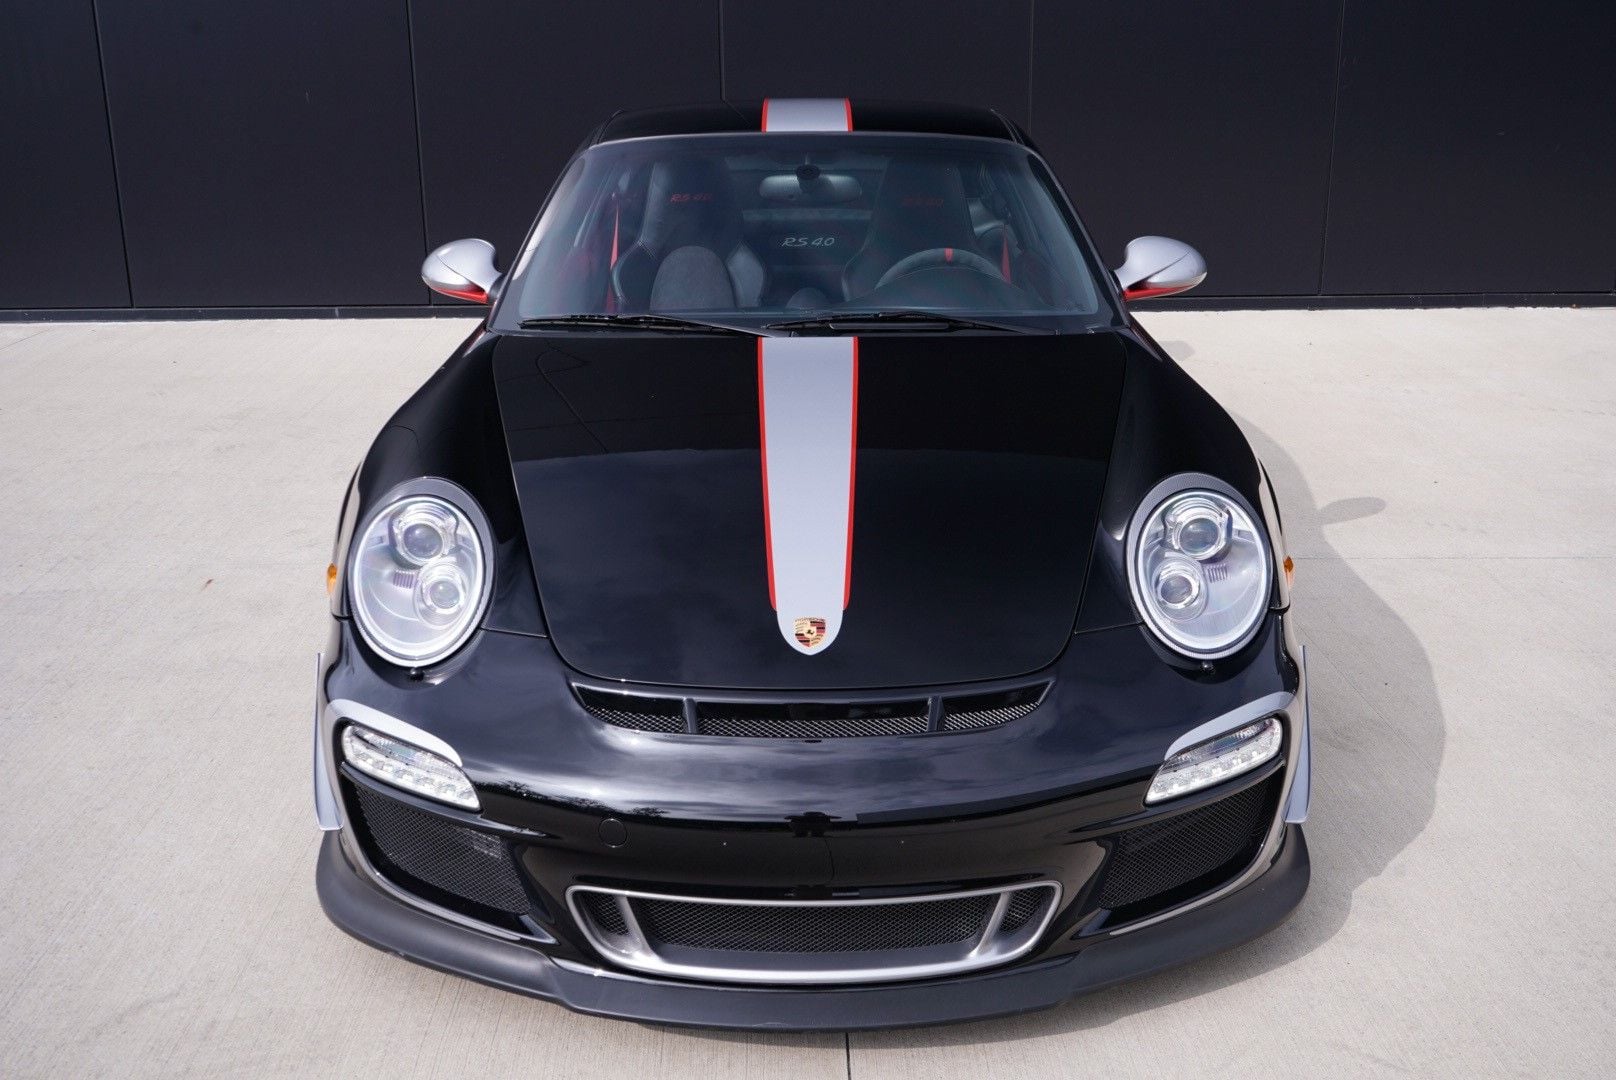 2011 Porsche 911 - 2011 PORSCHE 911 GT3 RS 4.0 (BLACK BEAUTY) - Used - VIN WP0AF2A98BS785614 - 2,498 Miles - 6 cyl - 2WD - Manual - Coupe - Black - Houston, TX 77090, United States